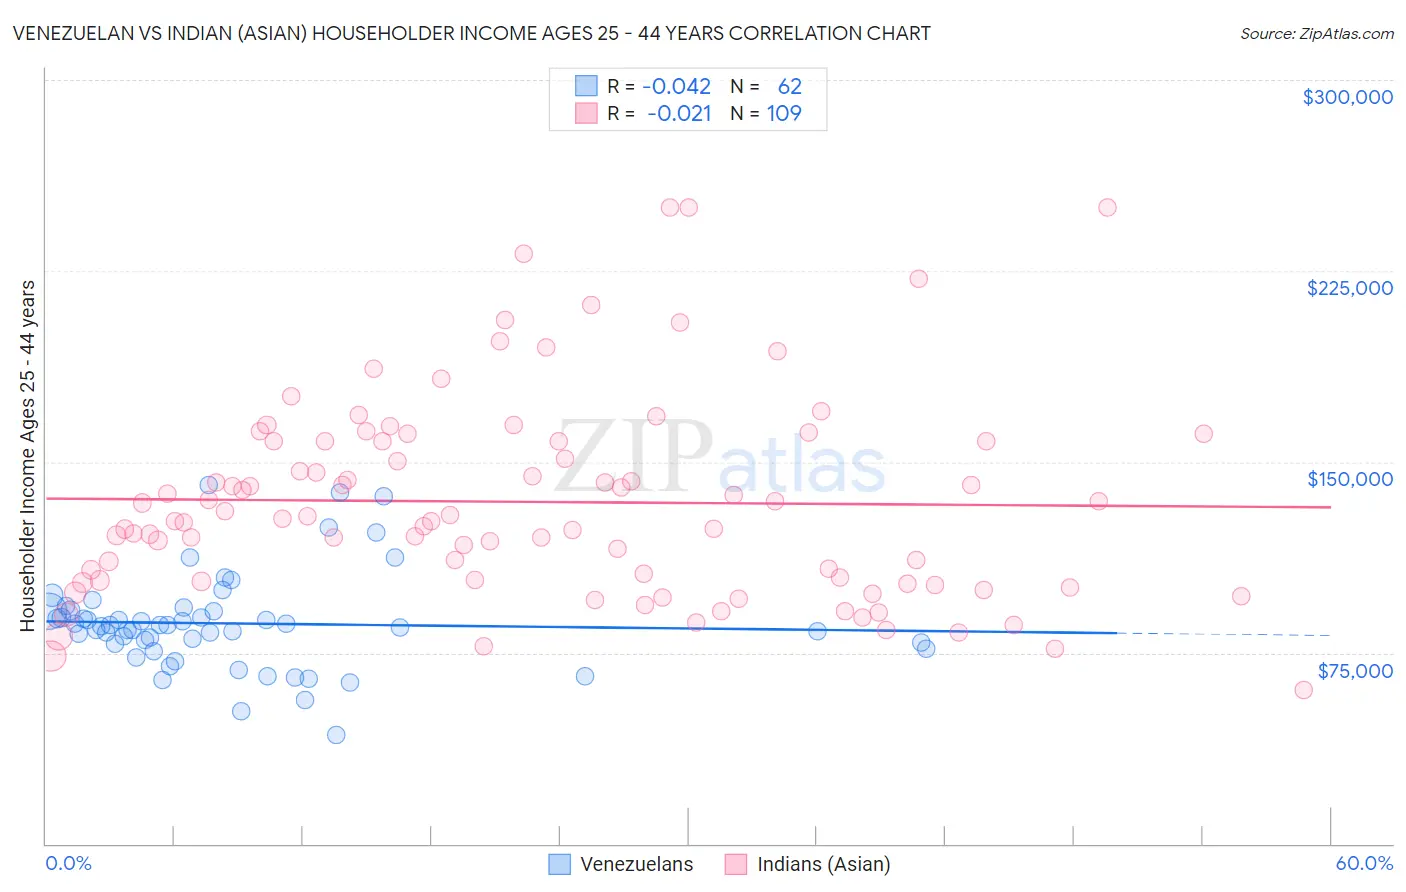 Venezuelan vs Indian (Asian) Householder Income Ages 25 - 44 years